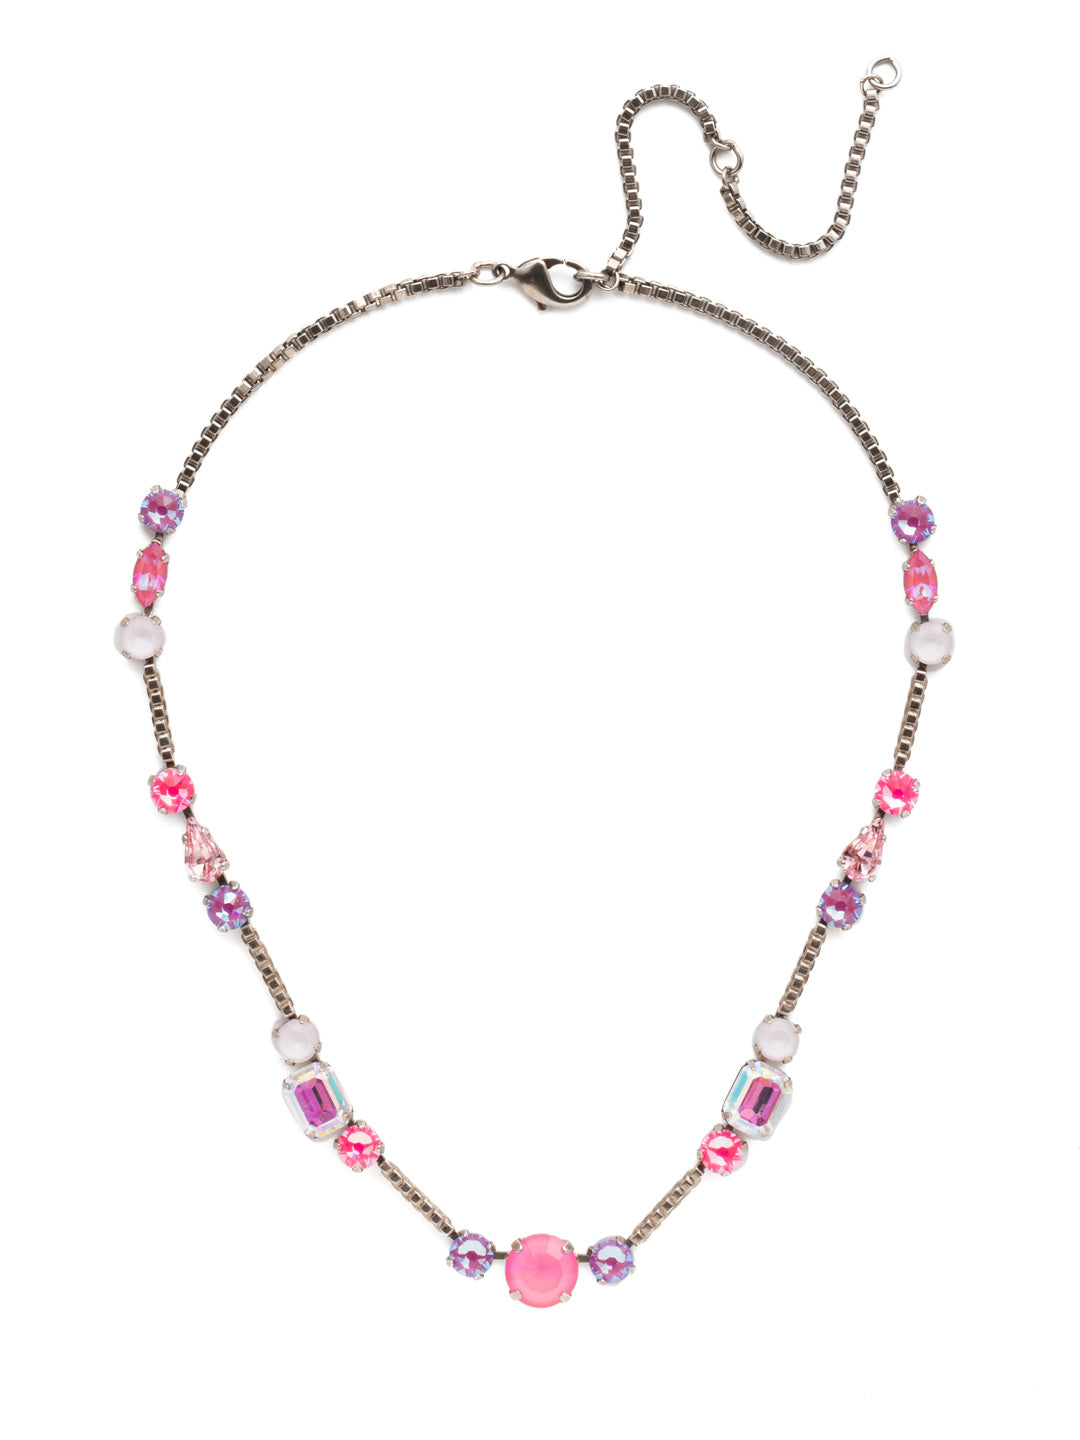 Poppy Tennis Necklace - NEN18ASETP - The Poppy Tennis Necklace is anything but ordinary. Wear it all when you combine classic, baguette and navette sparklers. It's structured and sophisticated. From Sorrelli's Electric Pink collection in our Antique Silver-tone finish.